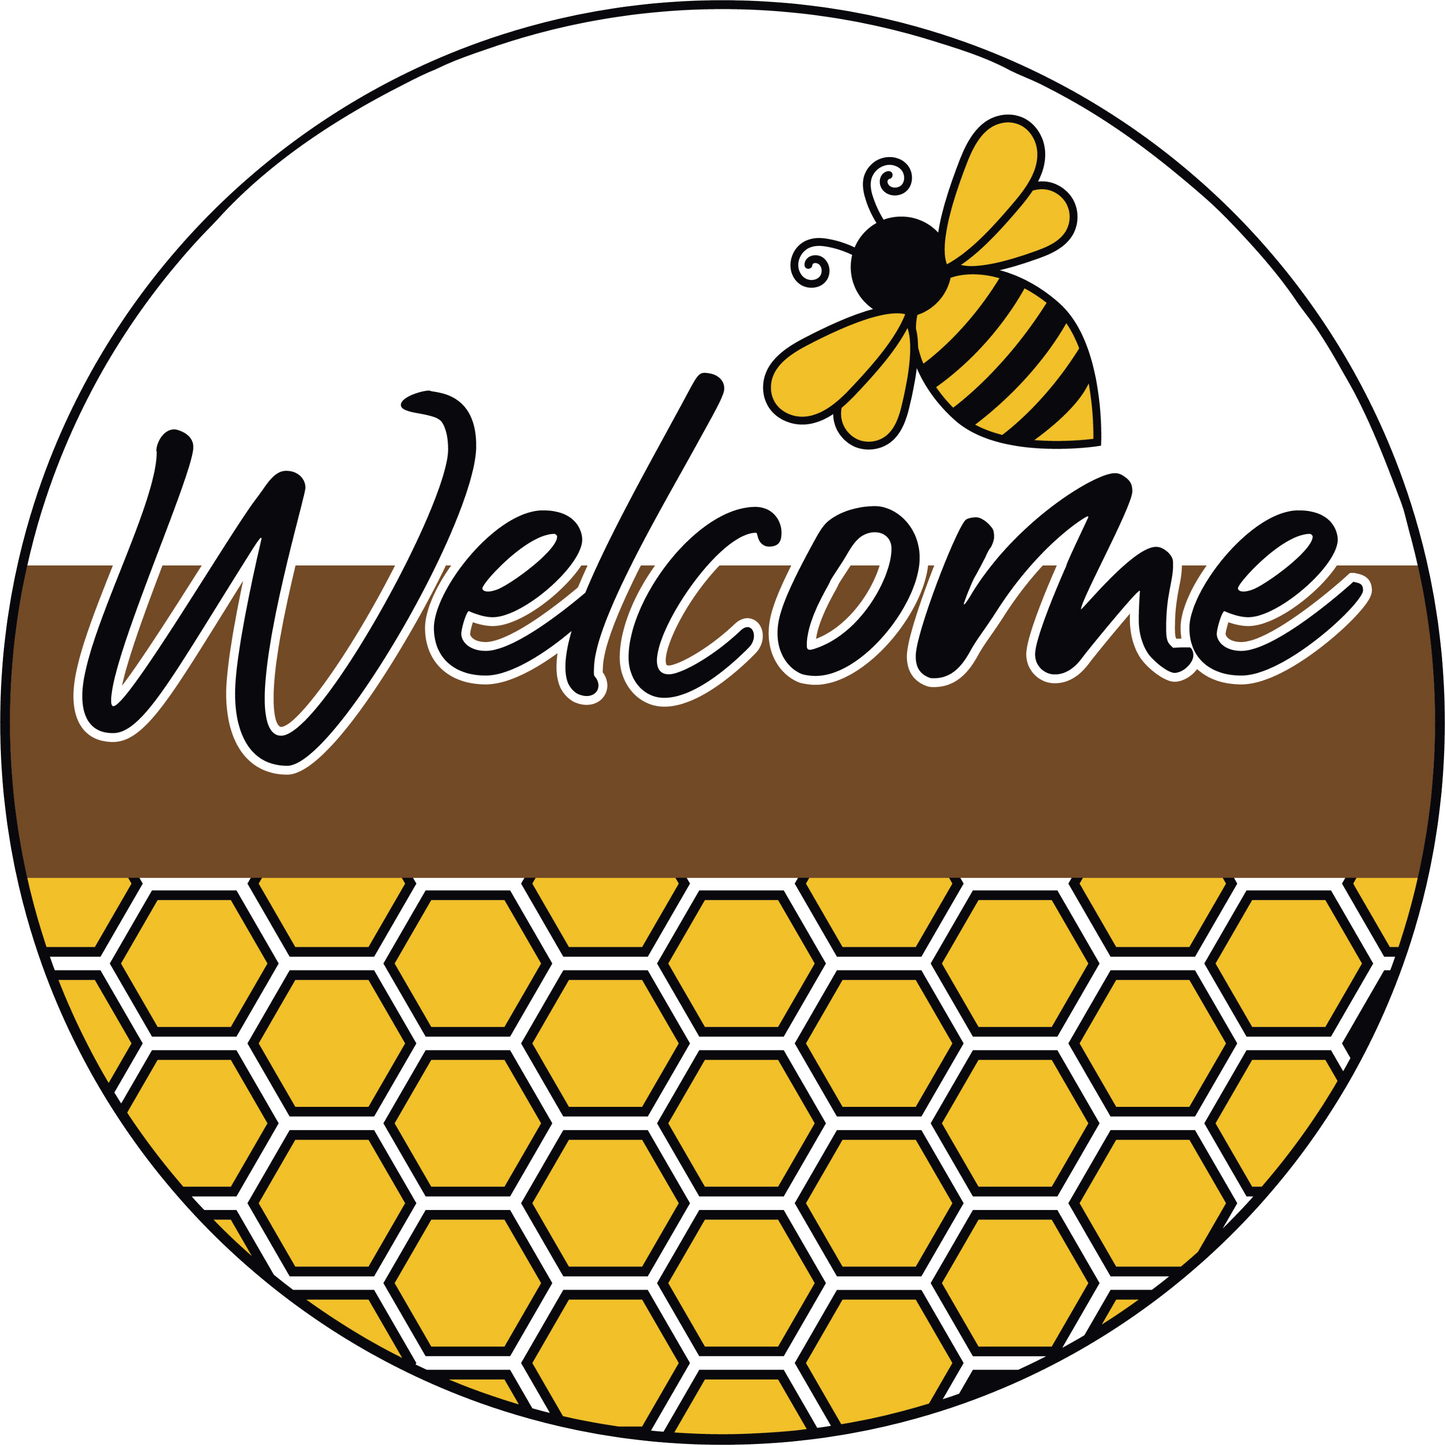 Bumble Bee and Honeycomb Welcome Metal Sign